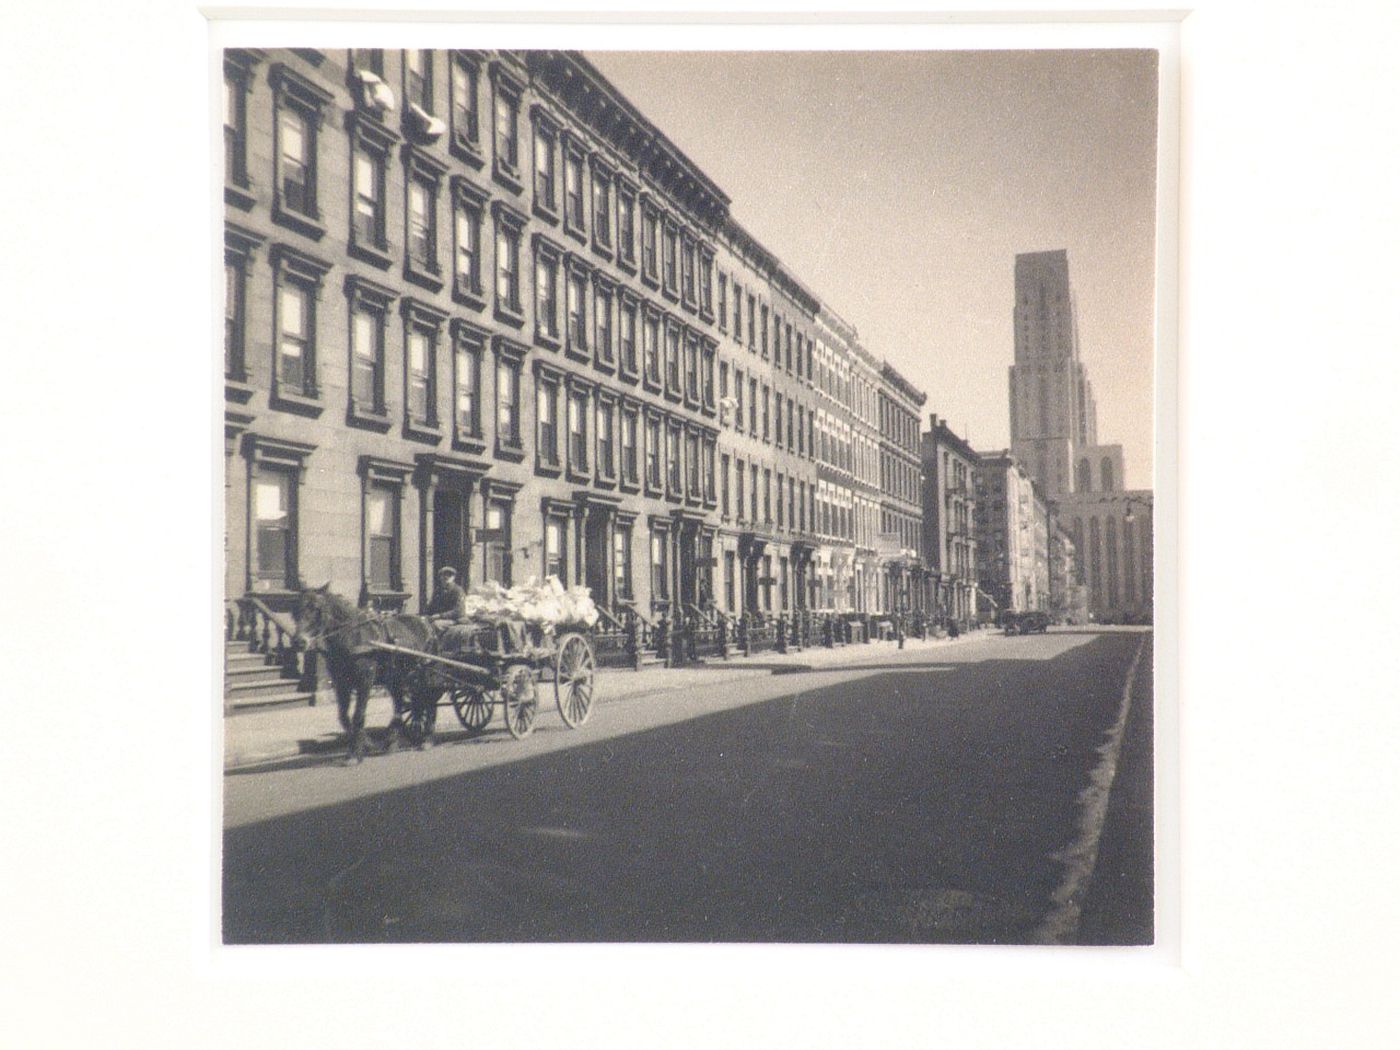 Rowhouses, horse & cart on street, Cornell Hospital at end of street, New York City, New York